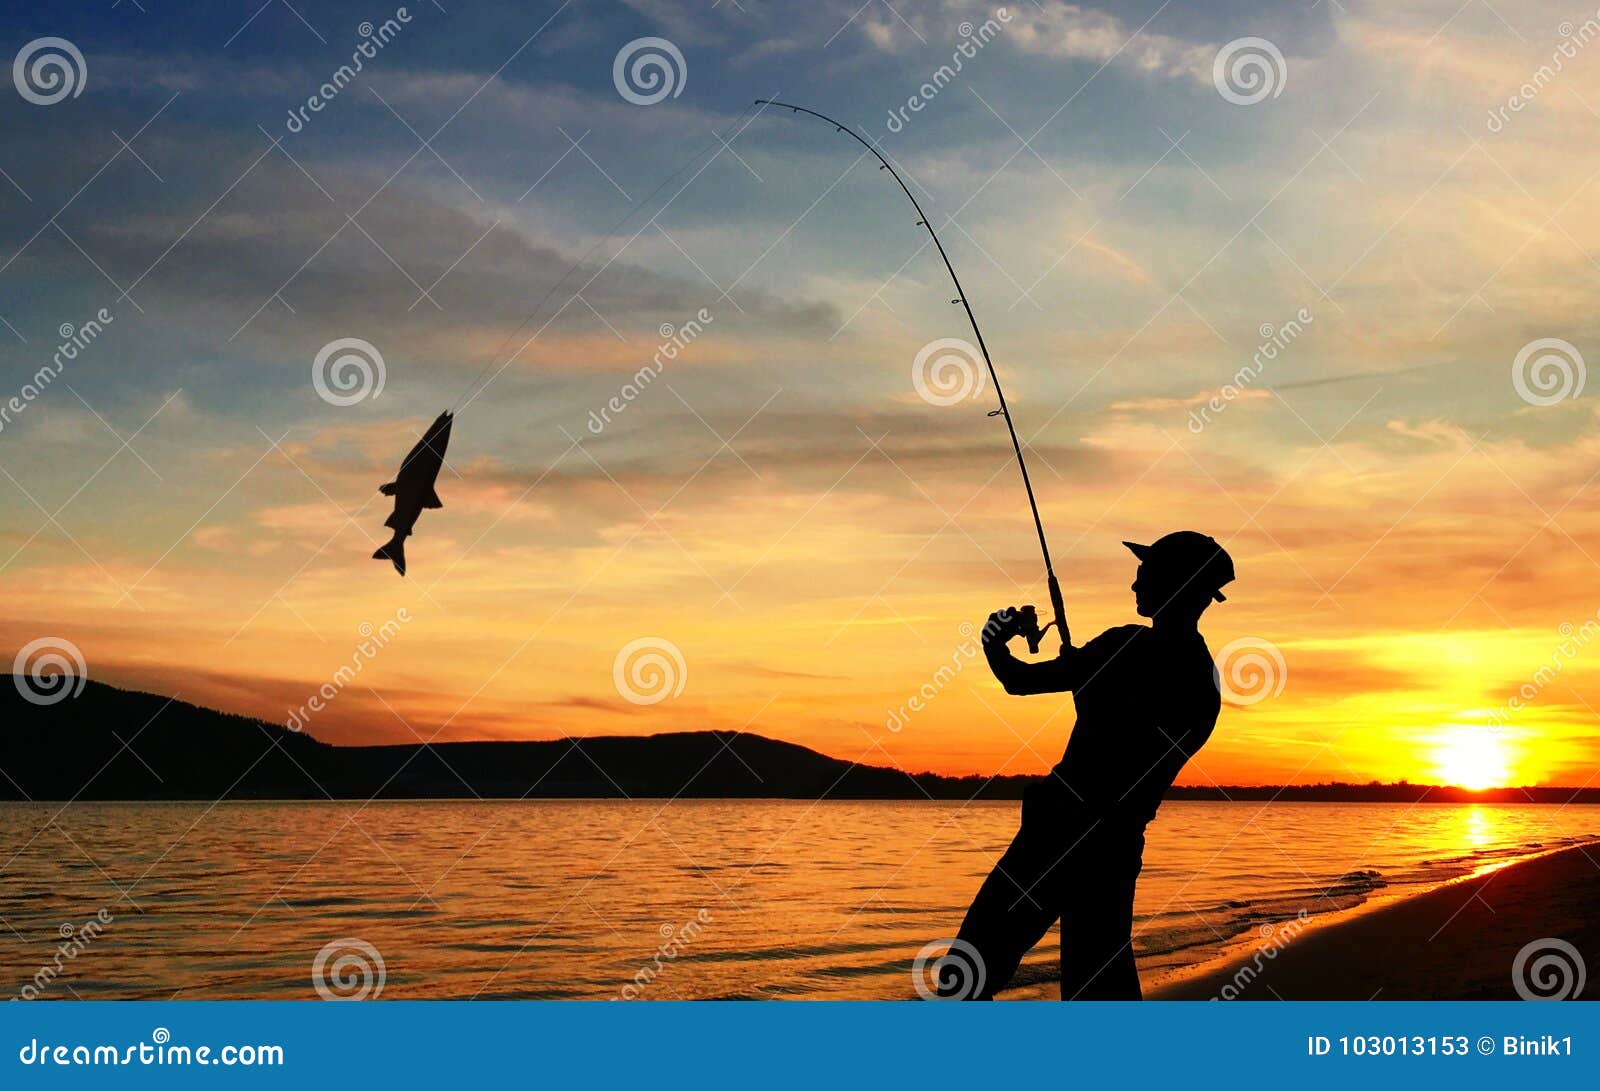 Young Man Fishing at Sunset Stock Image - Image of casting, dark: 103013153